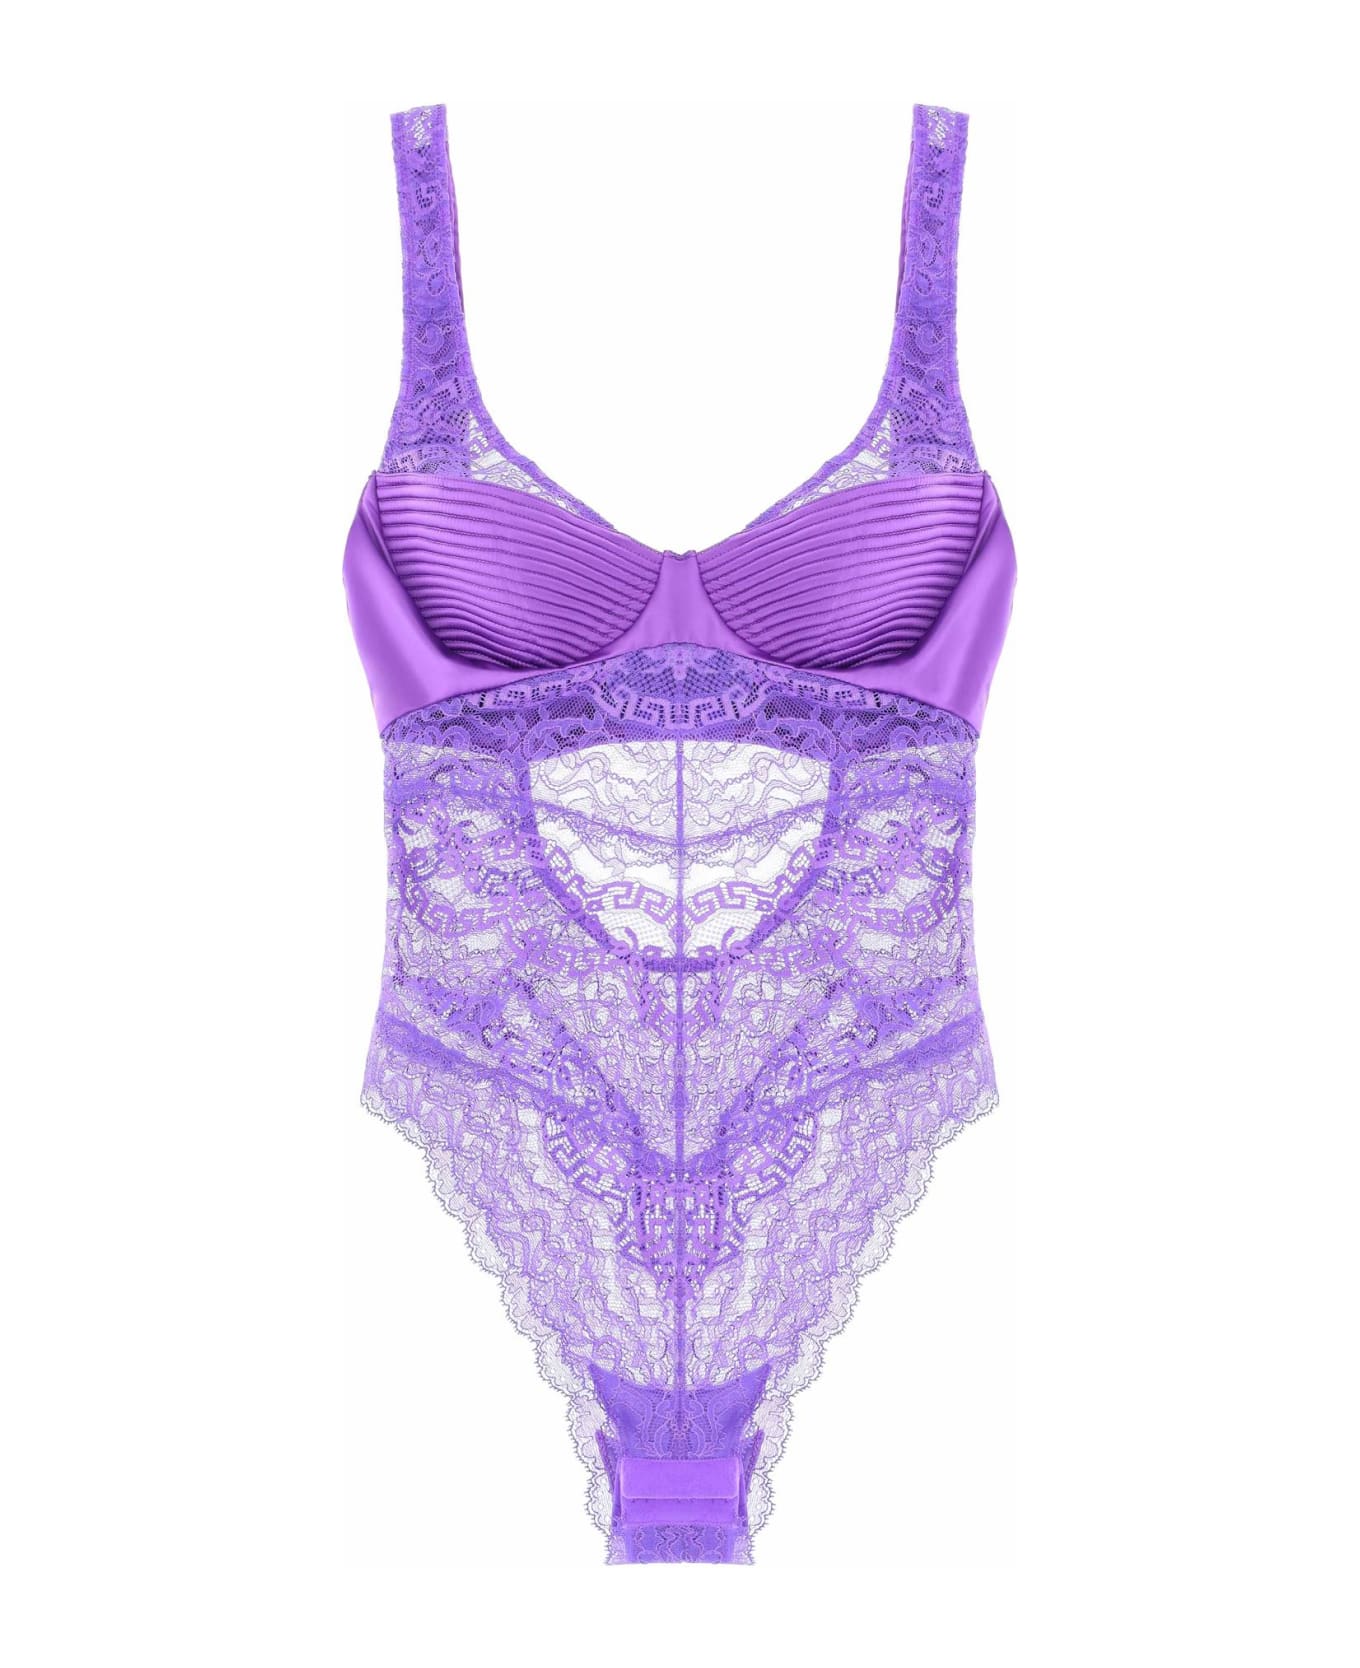 Versace Satin And Lace Bodysuit - BRIGHT DARK ORCHID (Purple)